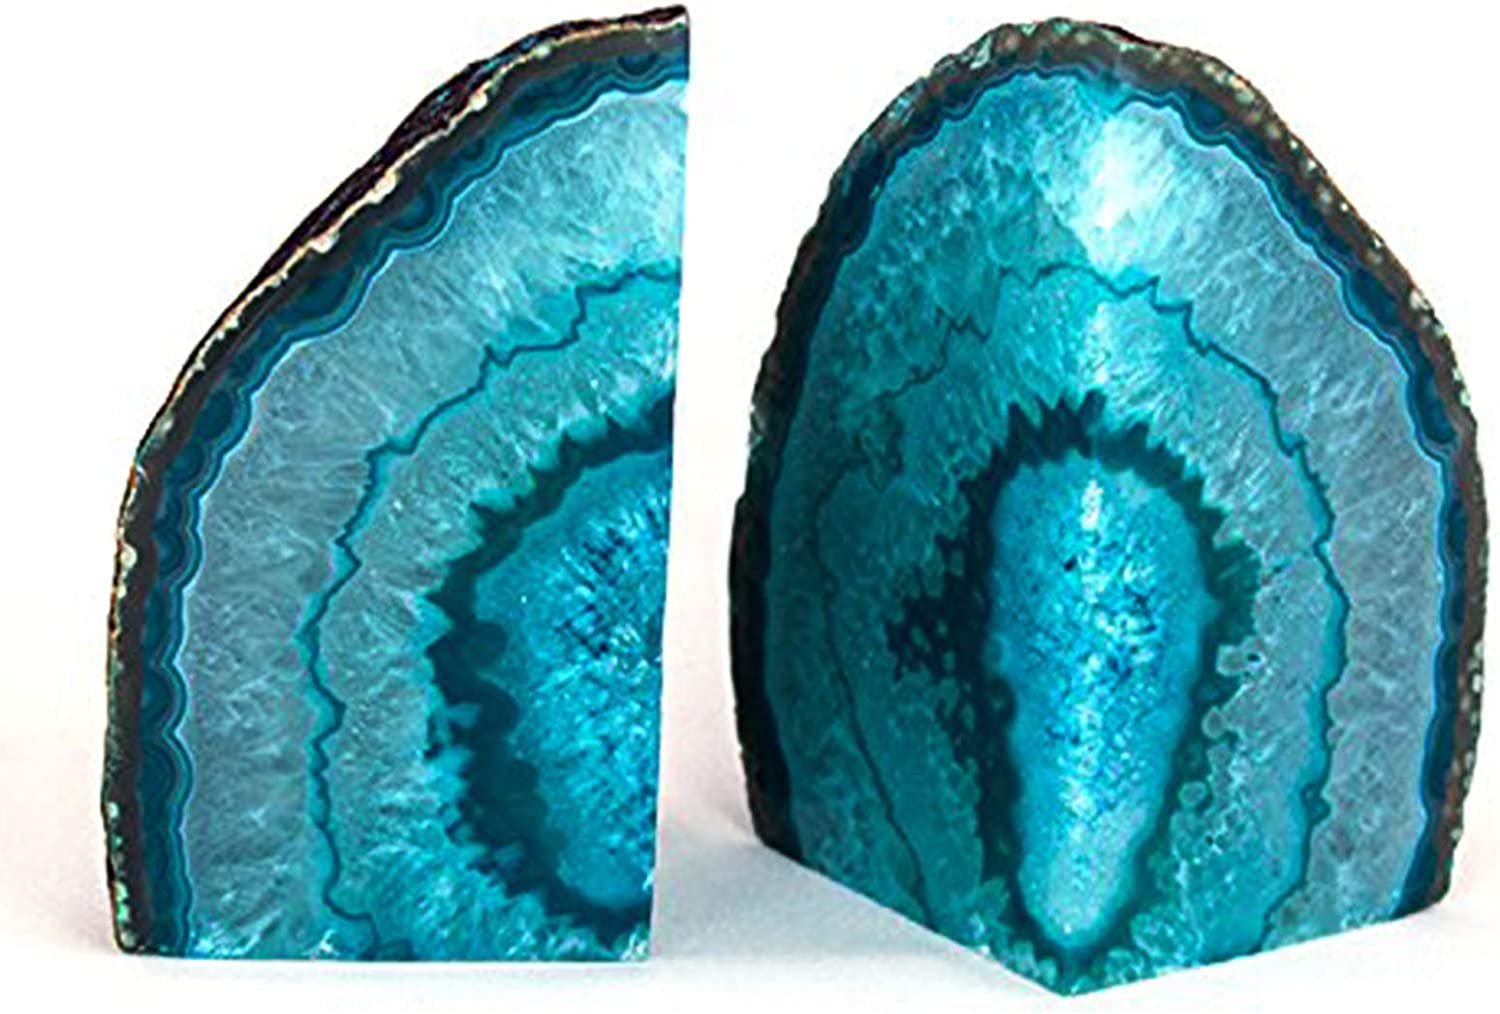 1Pair Teal Agate Bookends Crystal Geode Book Ends 2-3 LBS with Rubber Bumpers, Holder Small Books